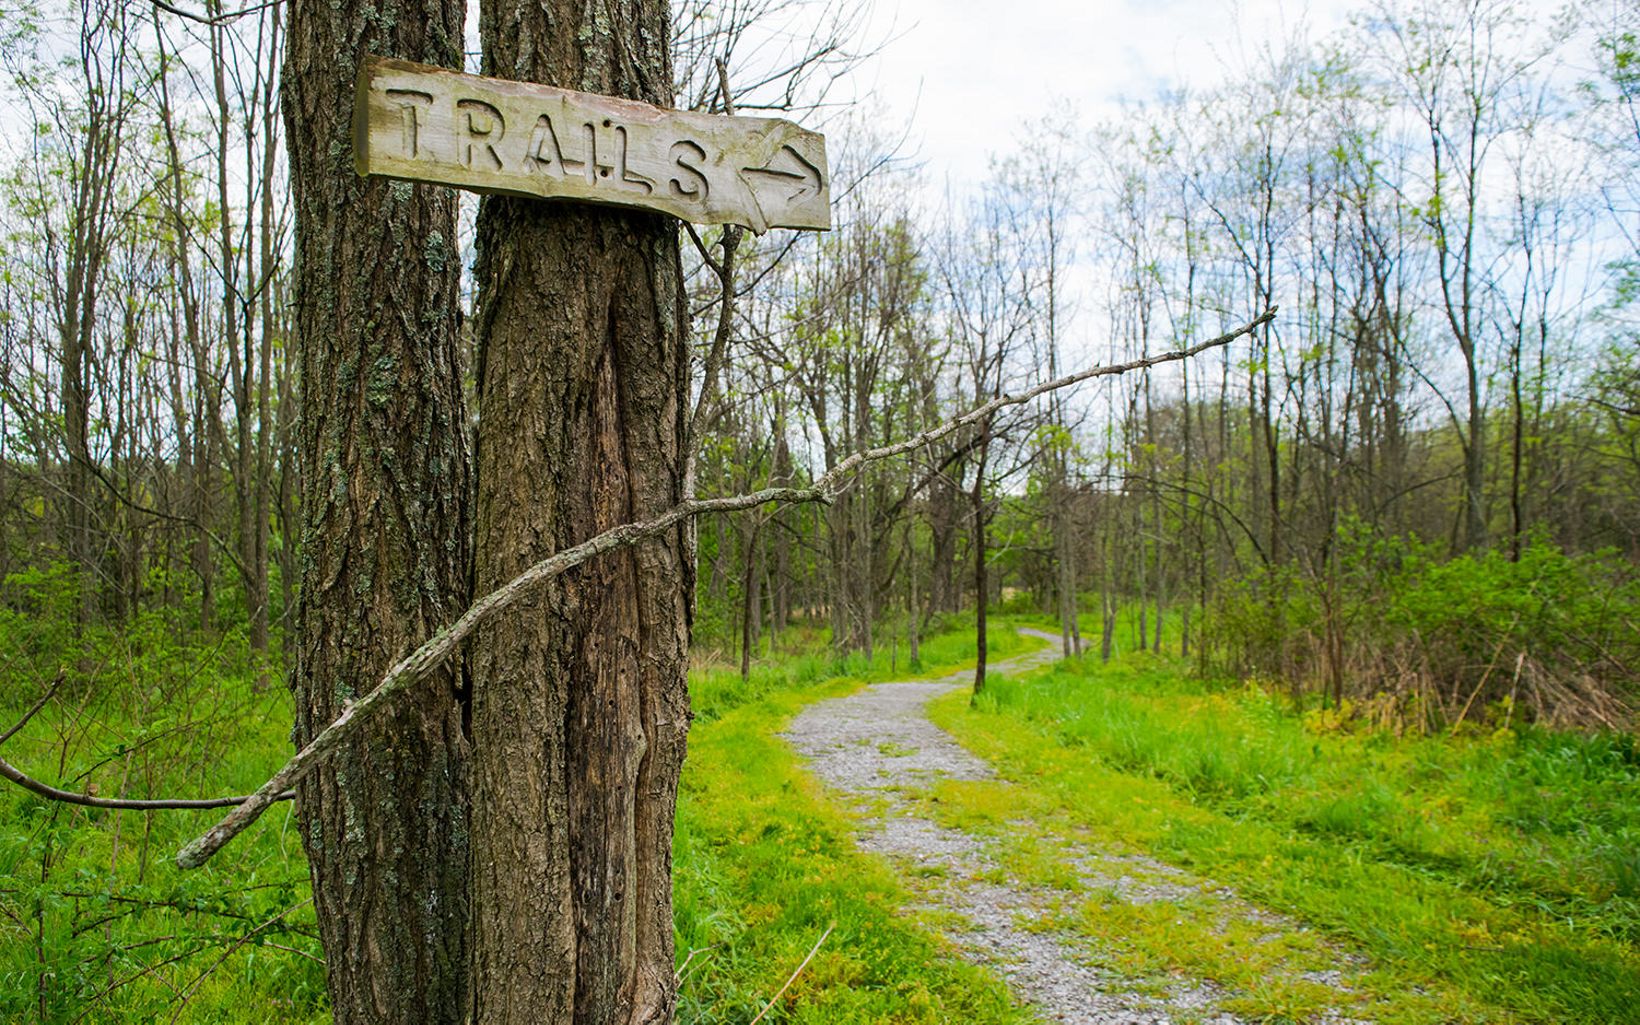 
                
                  Dupree Nature Preserve A trail sign is seen at Dupree Nature Preserve in Kentucky.
                  © Oliver Starks
                
              